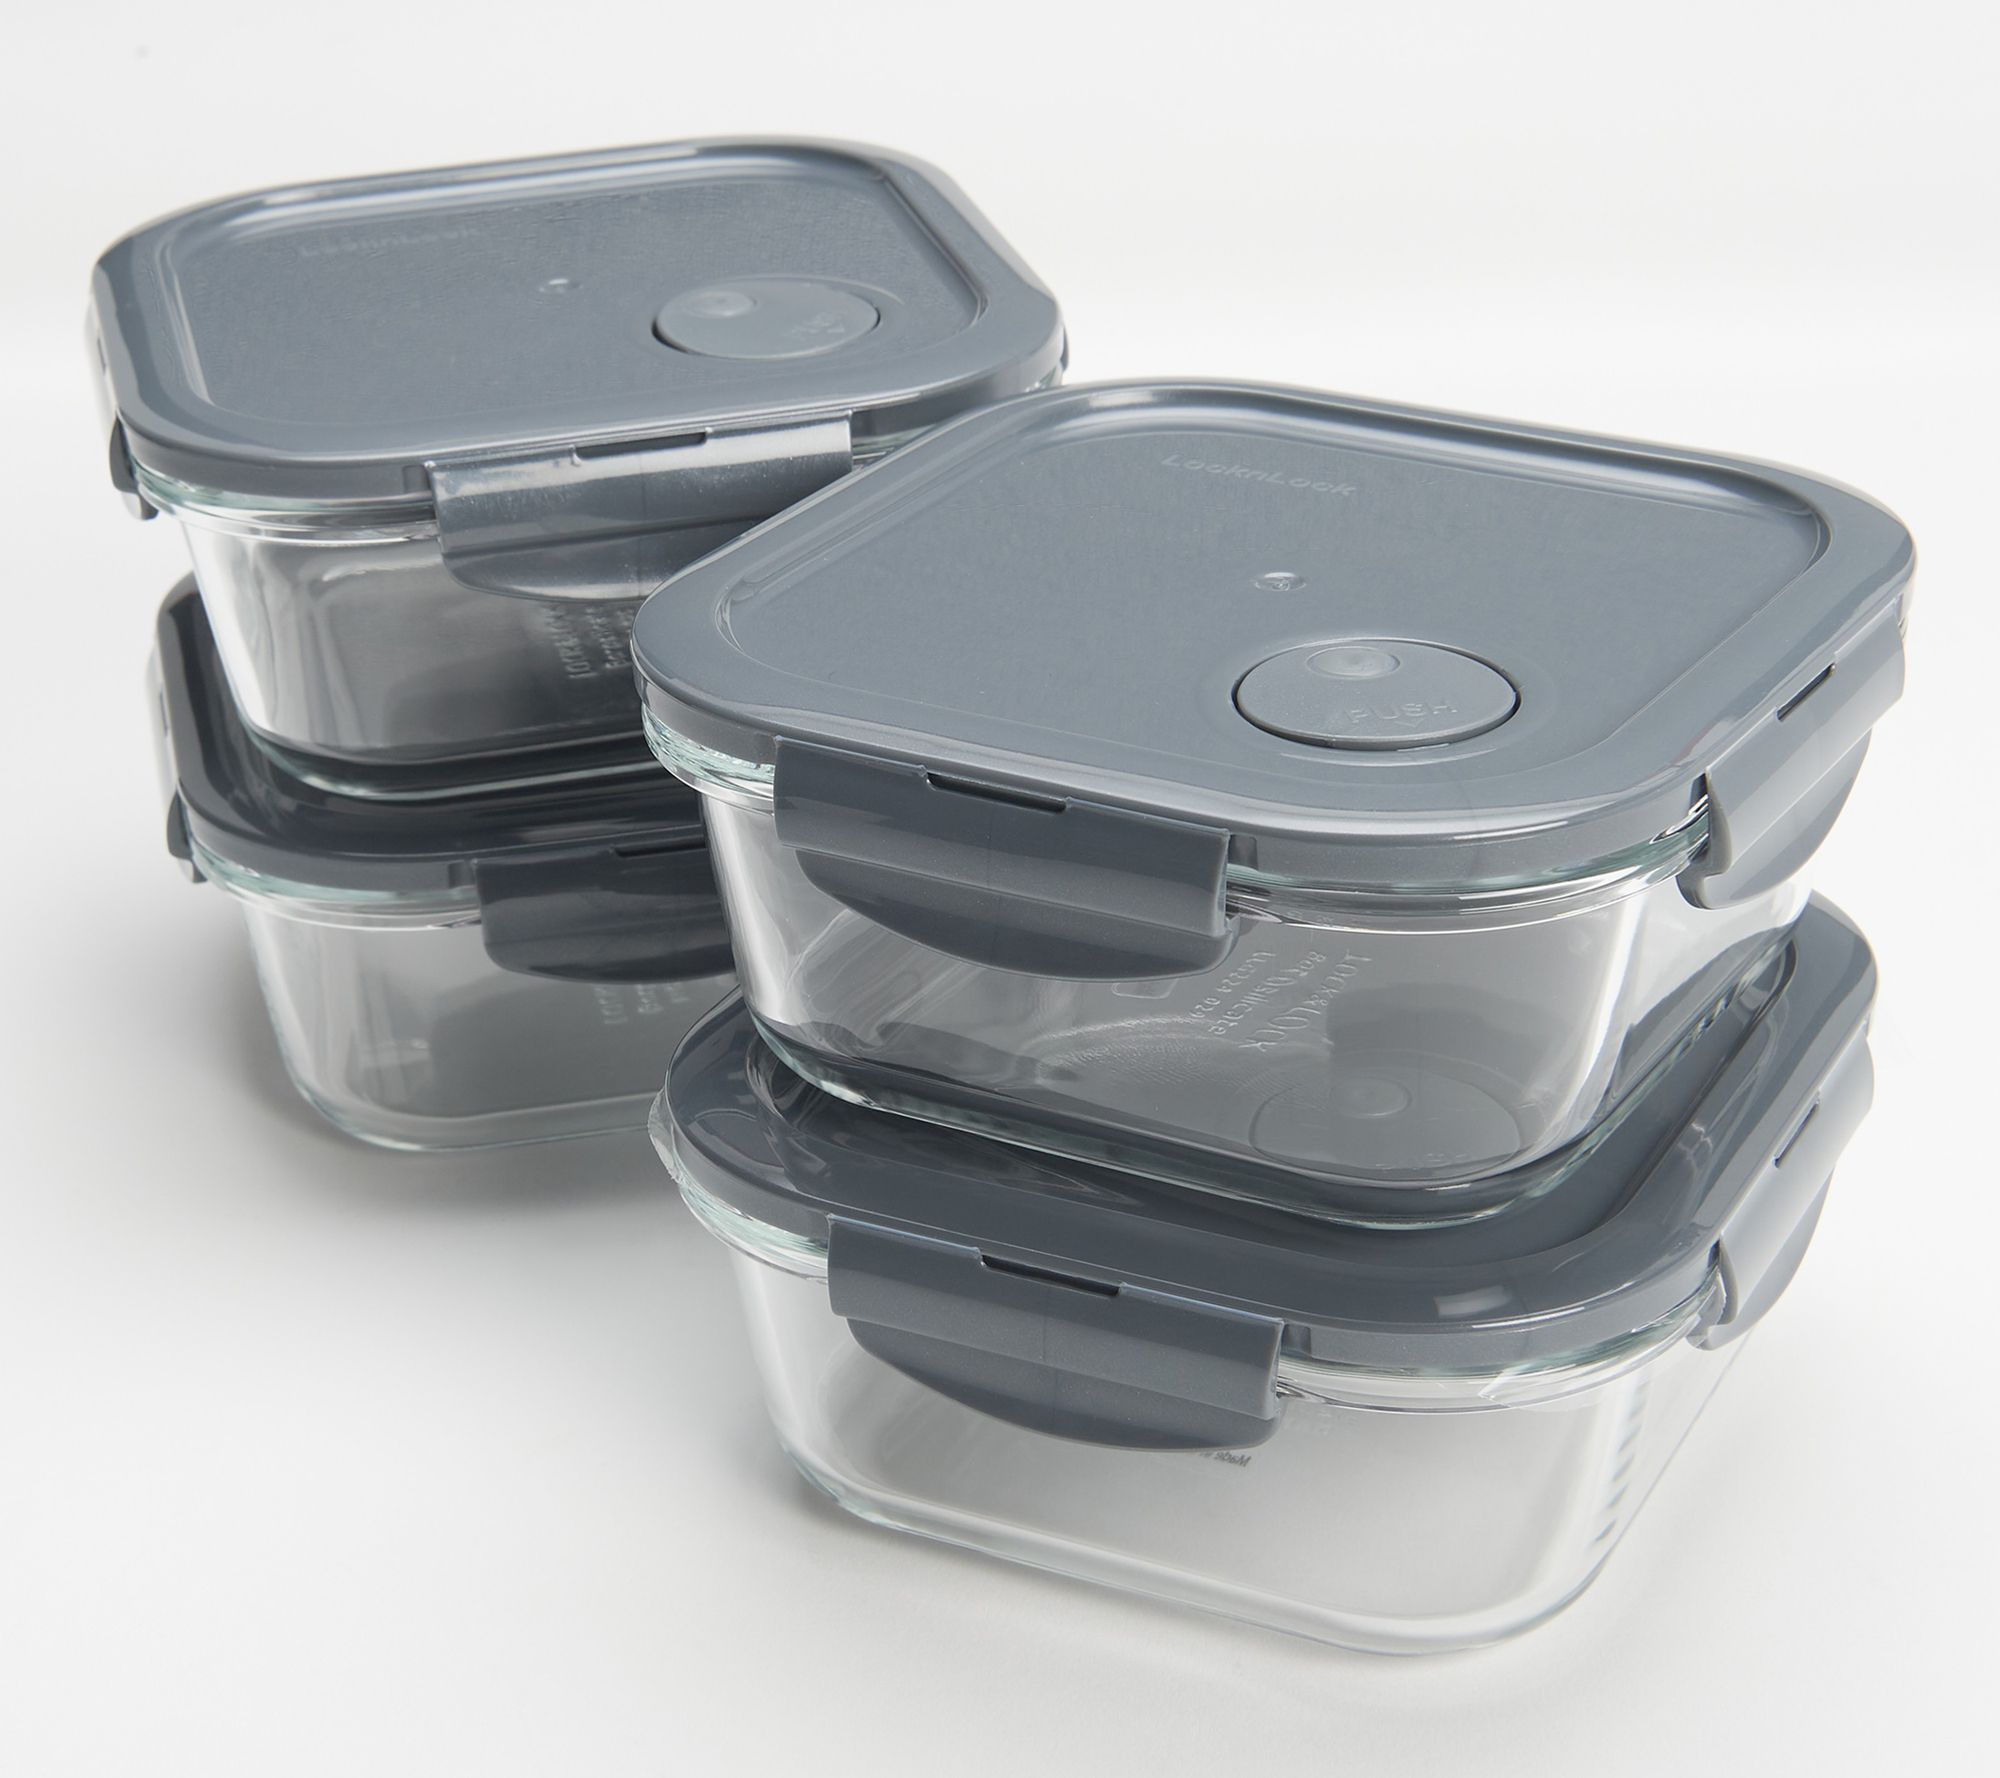 Zulay Kitchen Snap Lock Glass Food Containers - Gray - 1405 requests